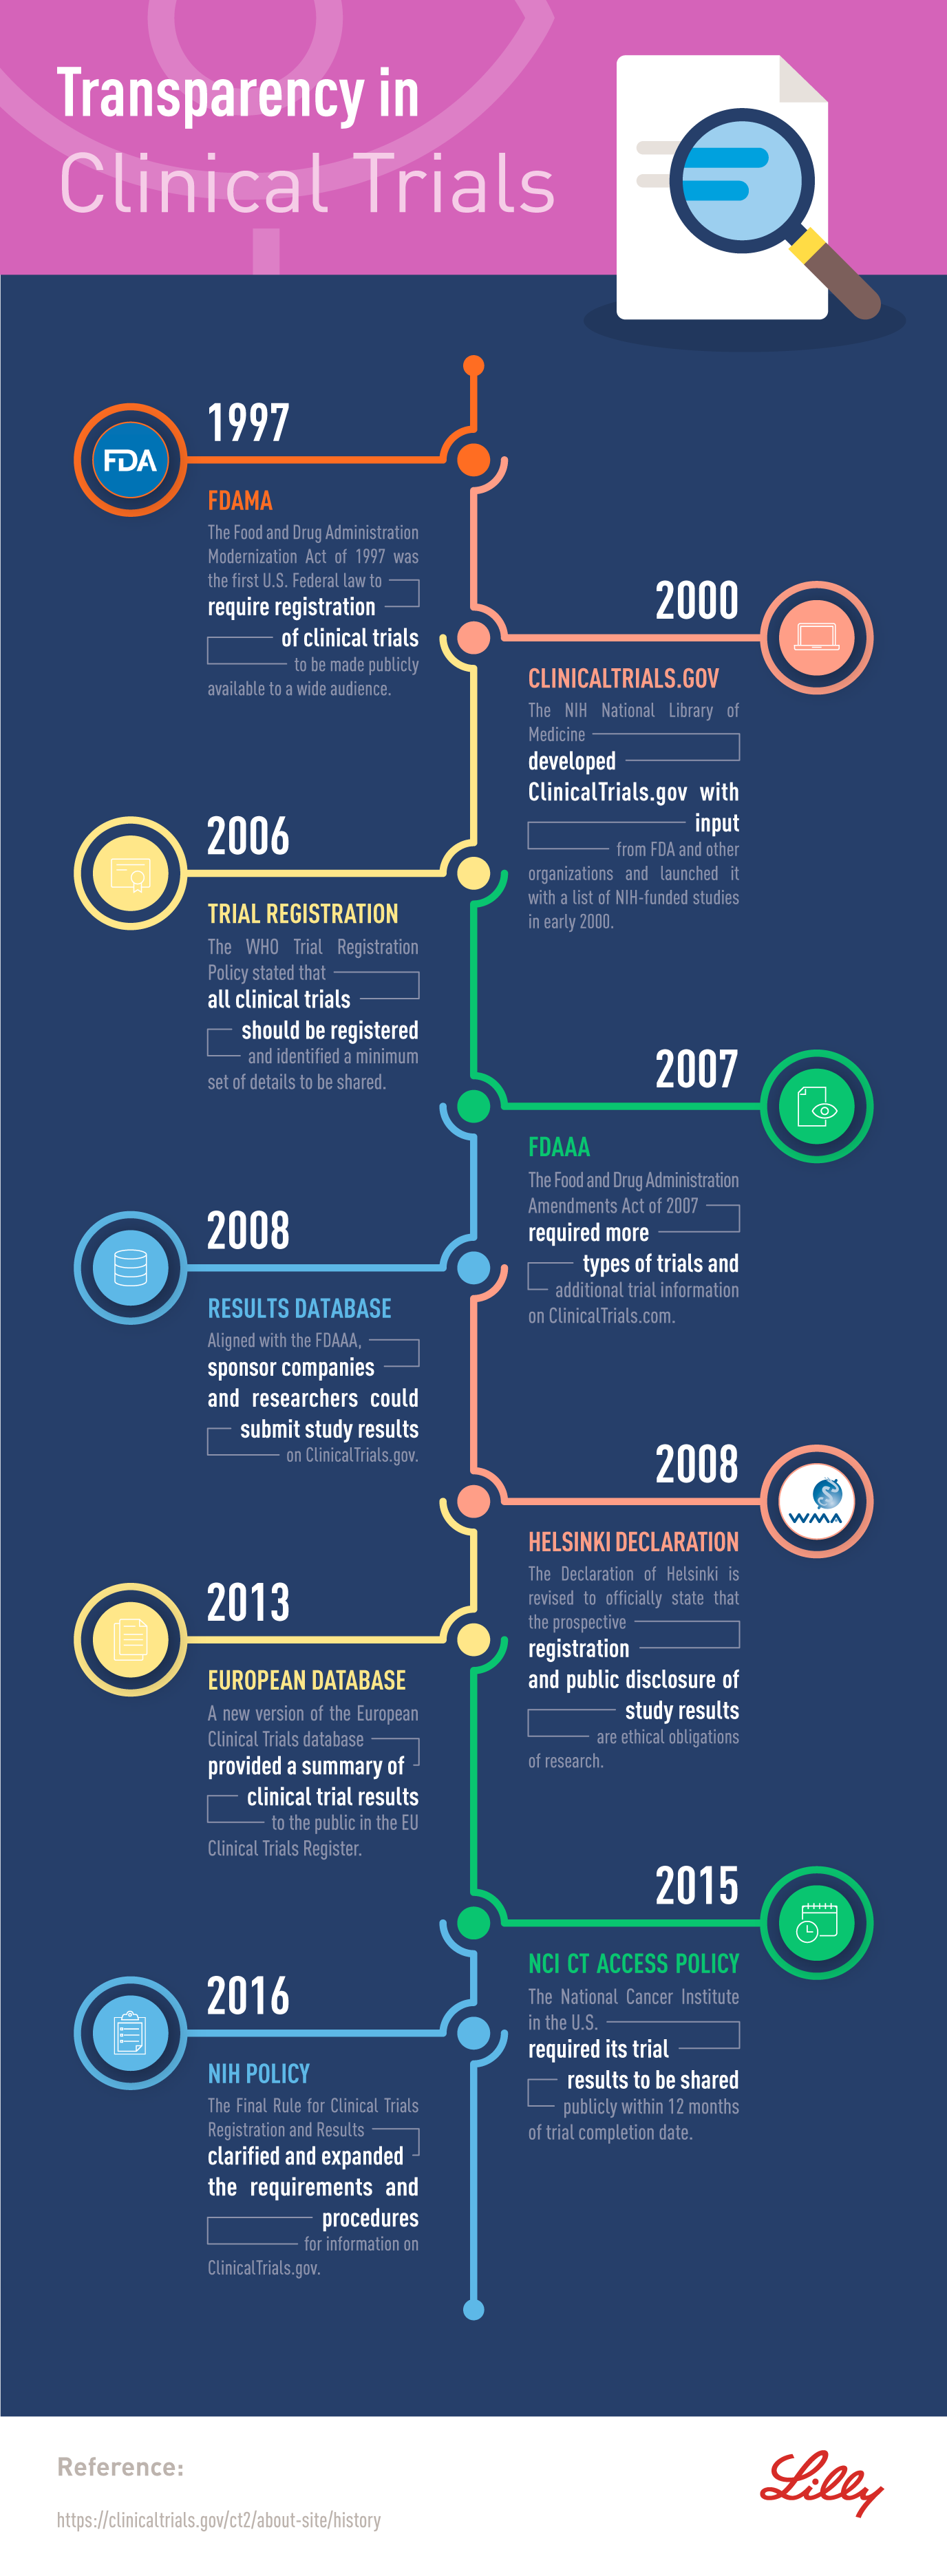 Timeline outlining clinical research transparency milestones